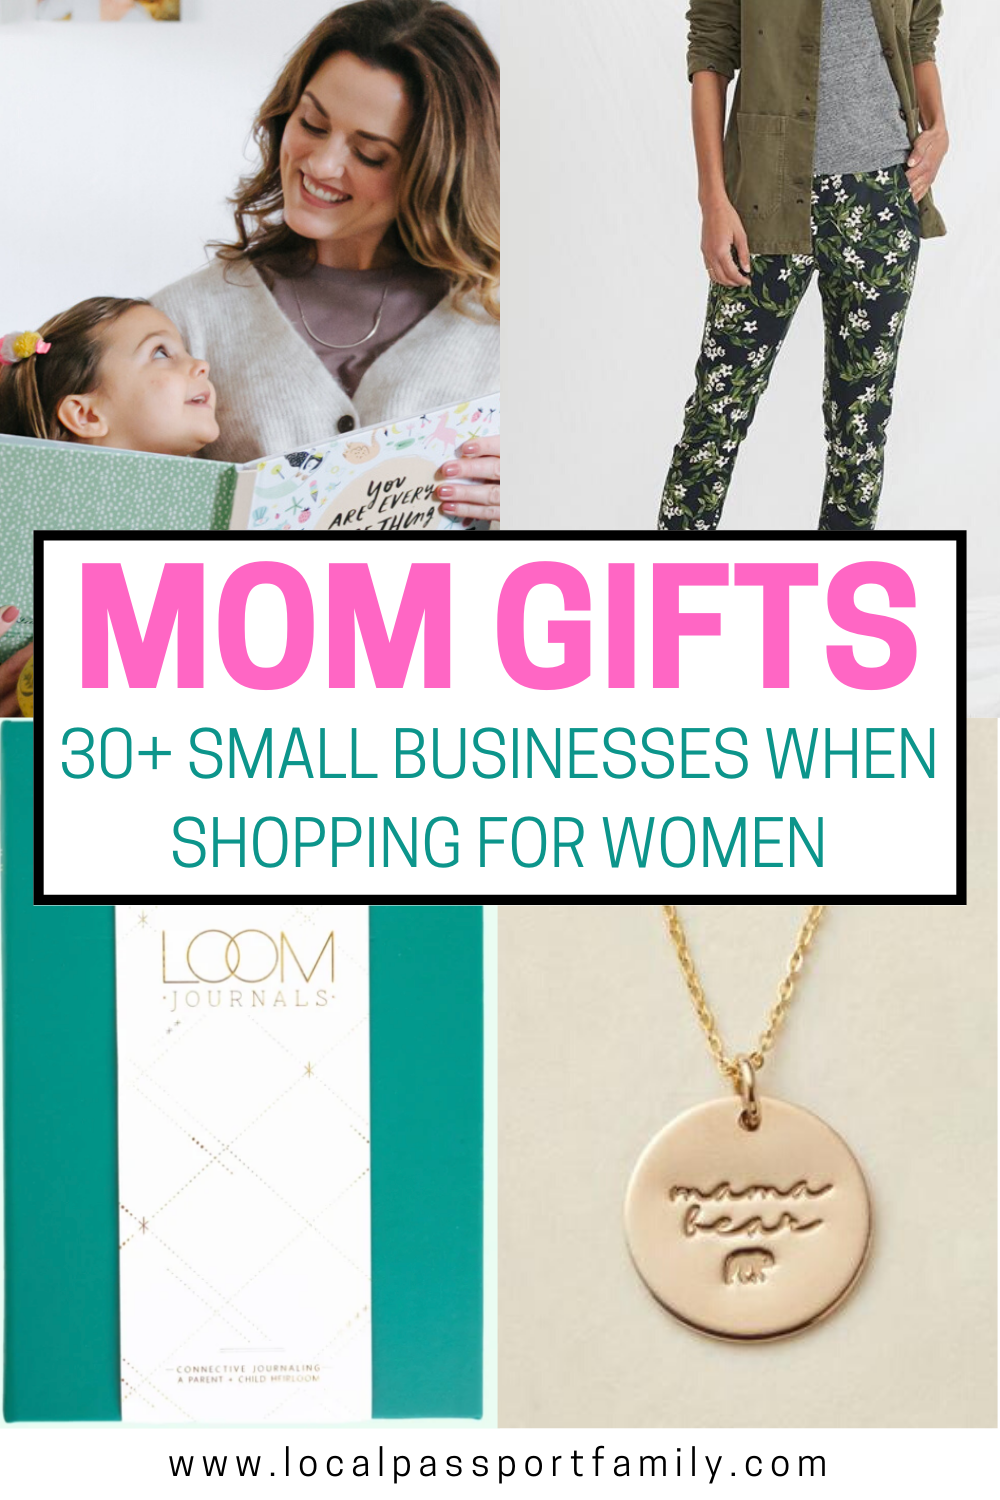 https://www.localpassportfamily.com/wp-content/uploads/2020/04/MOM-GIFTS-SHOPPING-FOR-WOMEN-FROM-SMALL-BUSINESSES.png